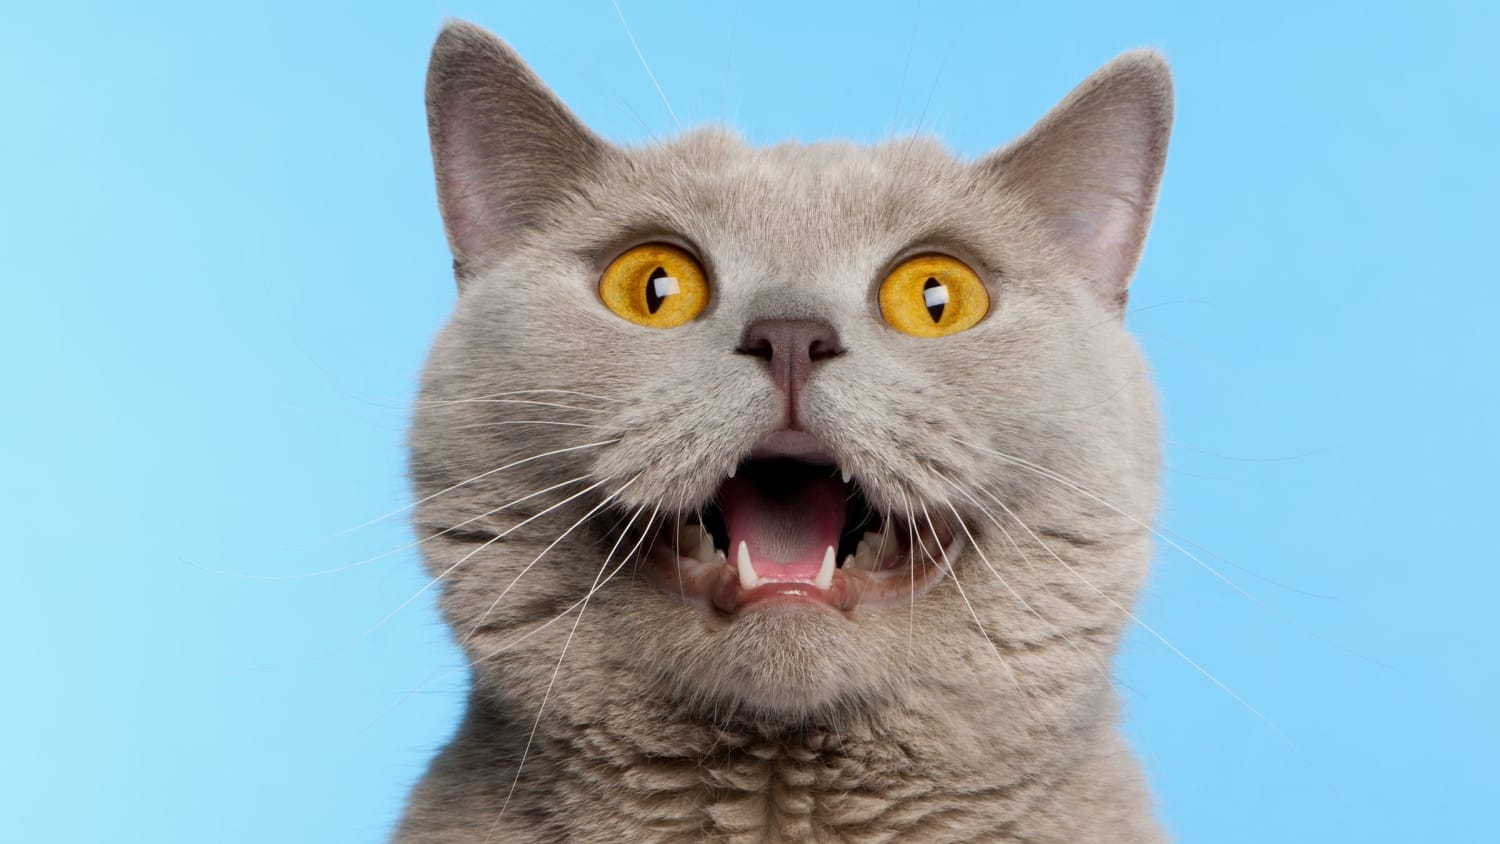 Why Do Cats Leave Their Mouths Open After Smelling Something?